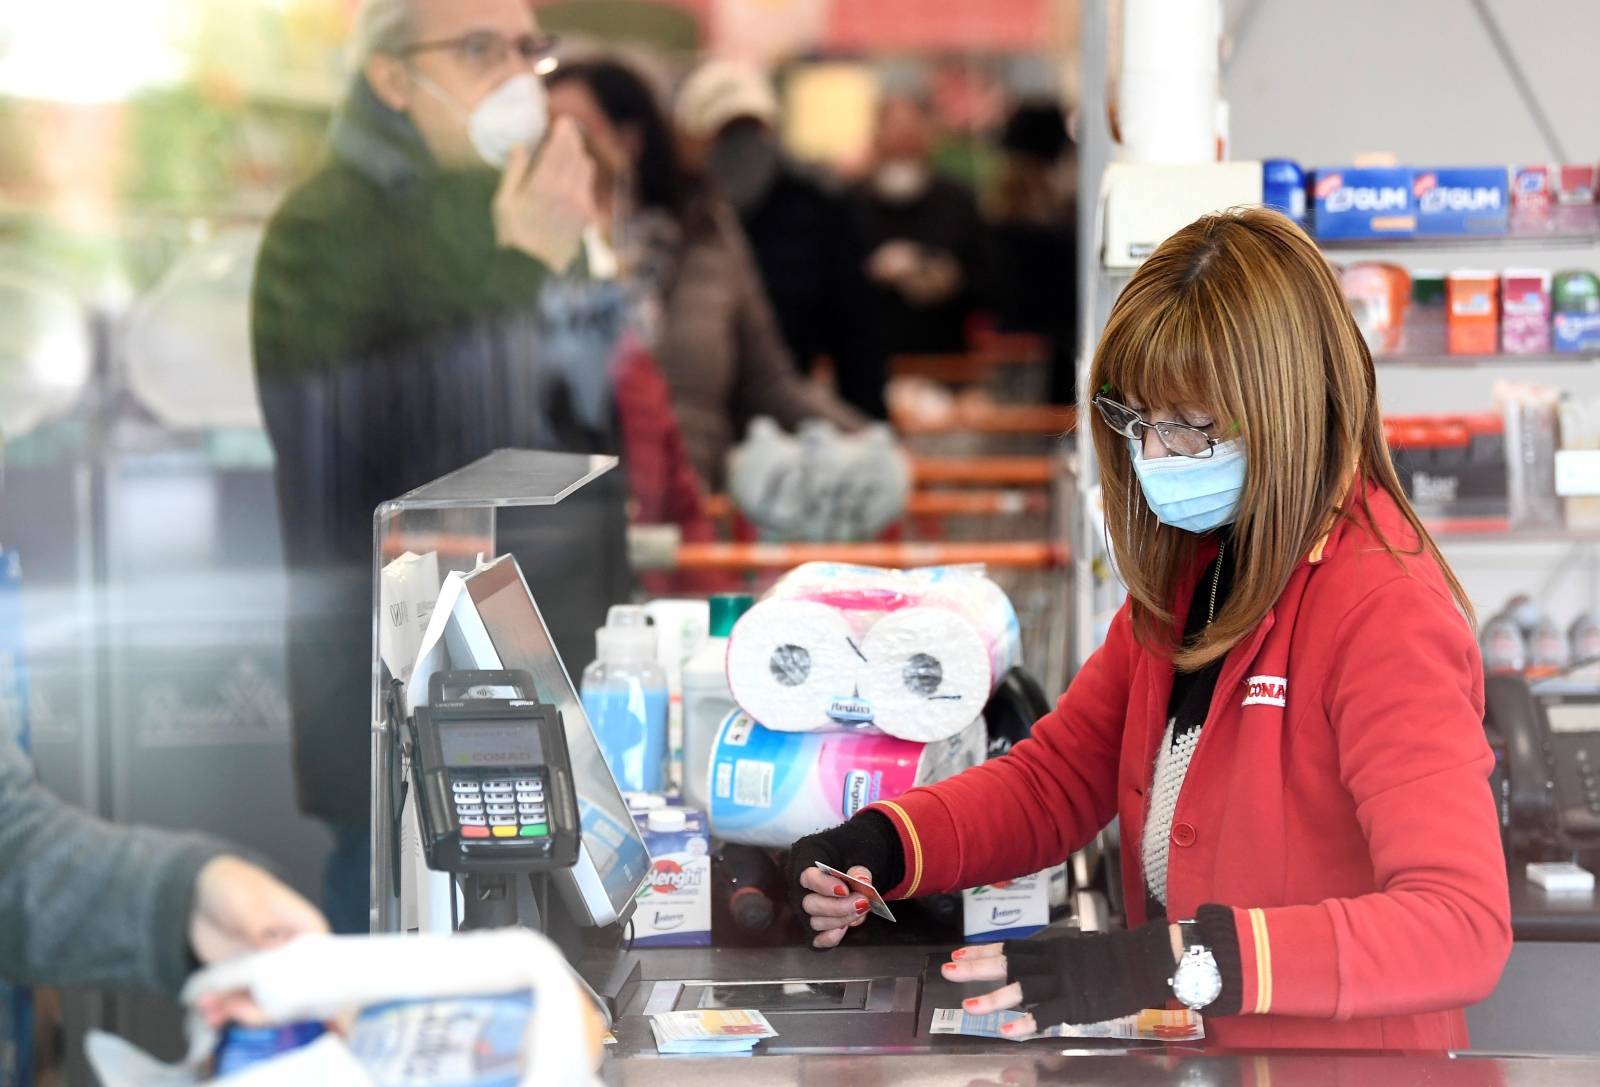 A worker wearing a face mask is pictured at a supermarket in the town of Casalpusterlengo